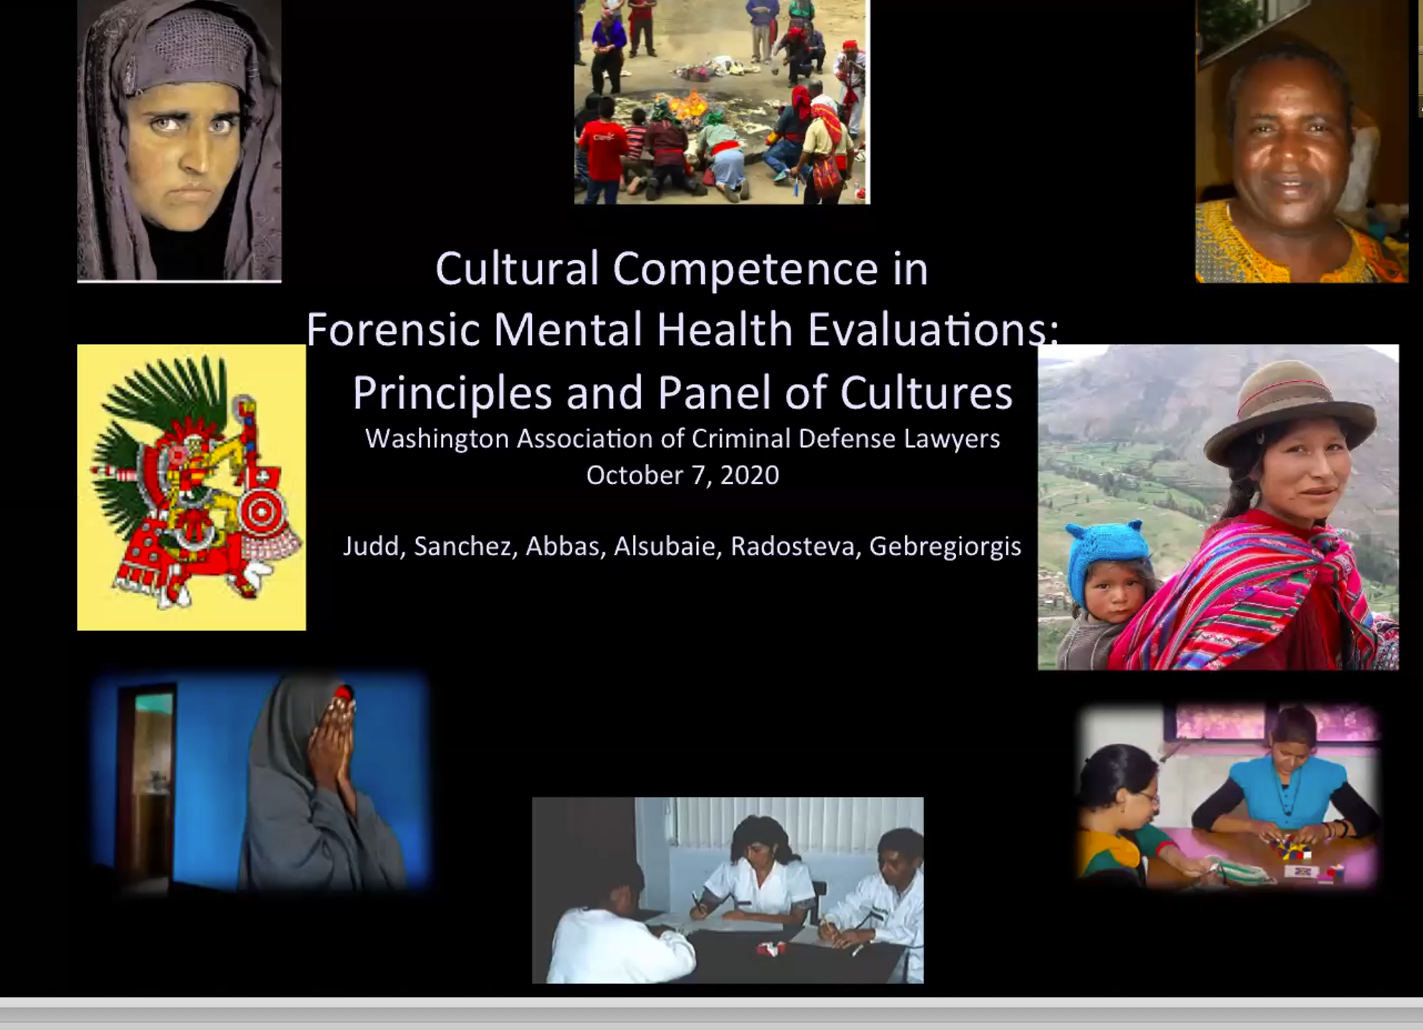 Mental Health 360: Cultural Competence in Forensic Mental Health Evaluations